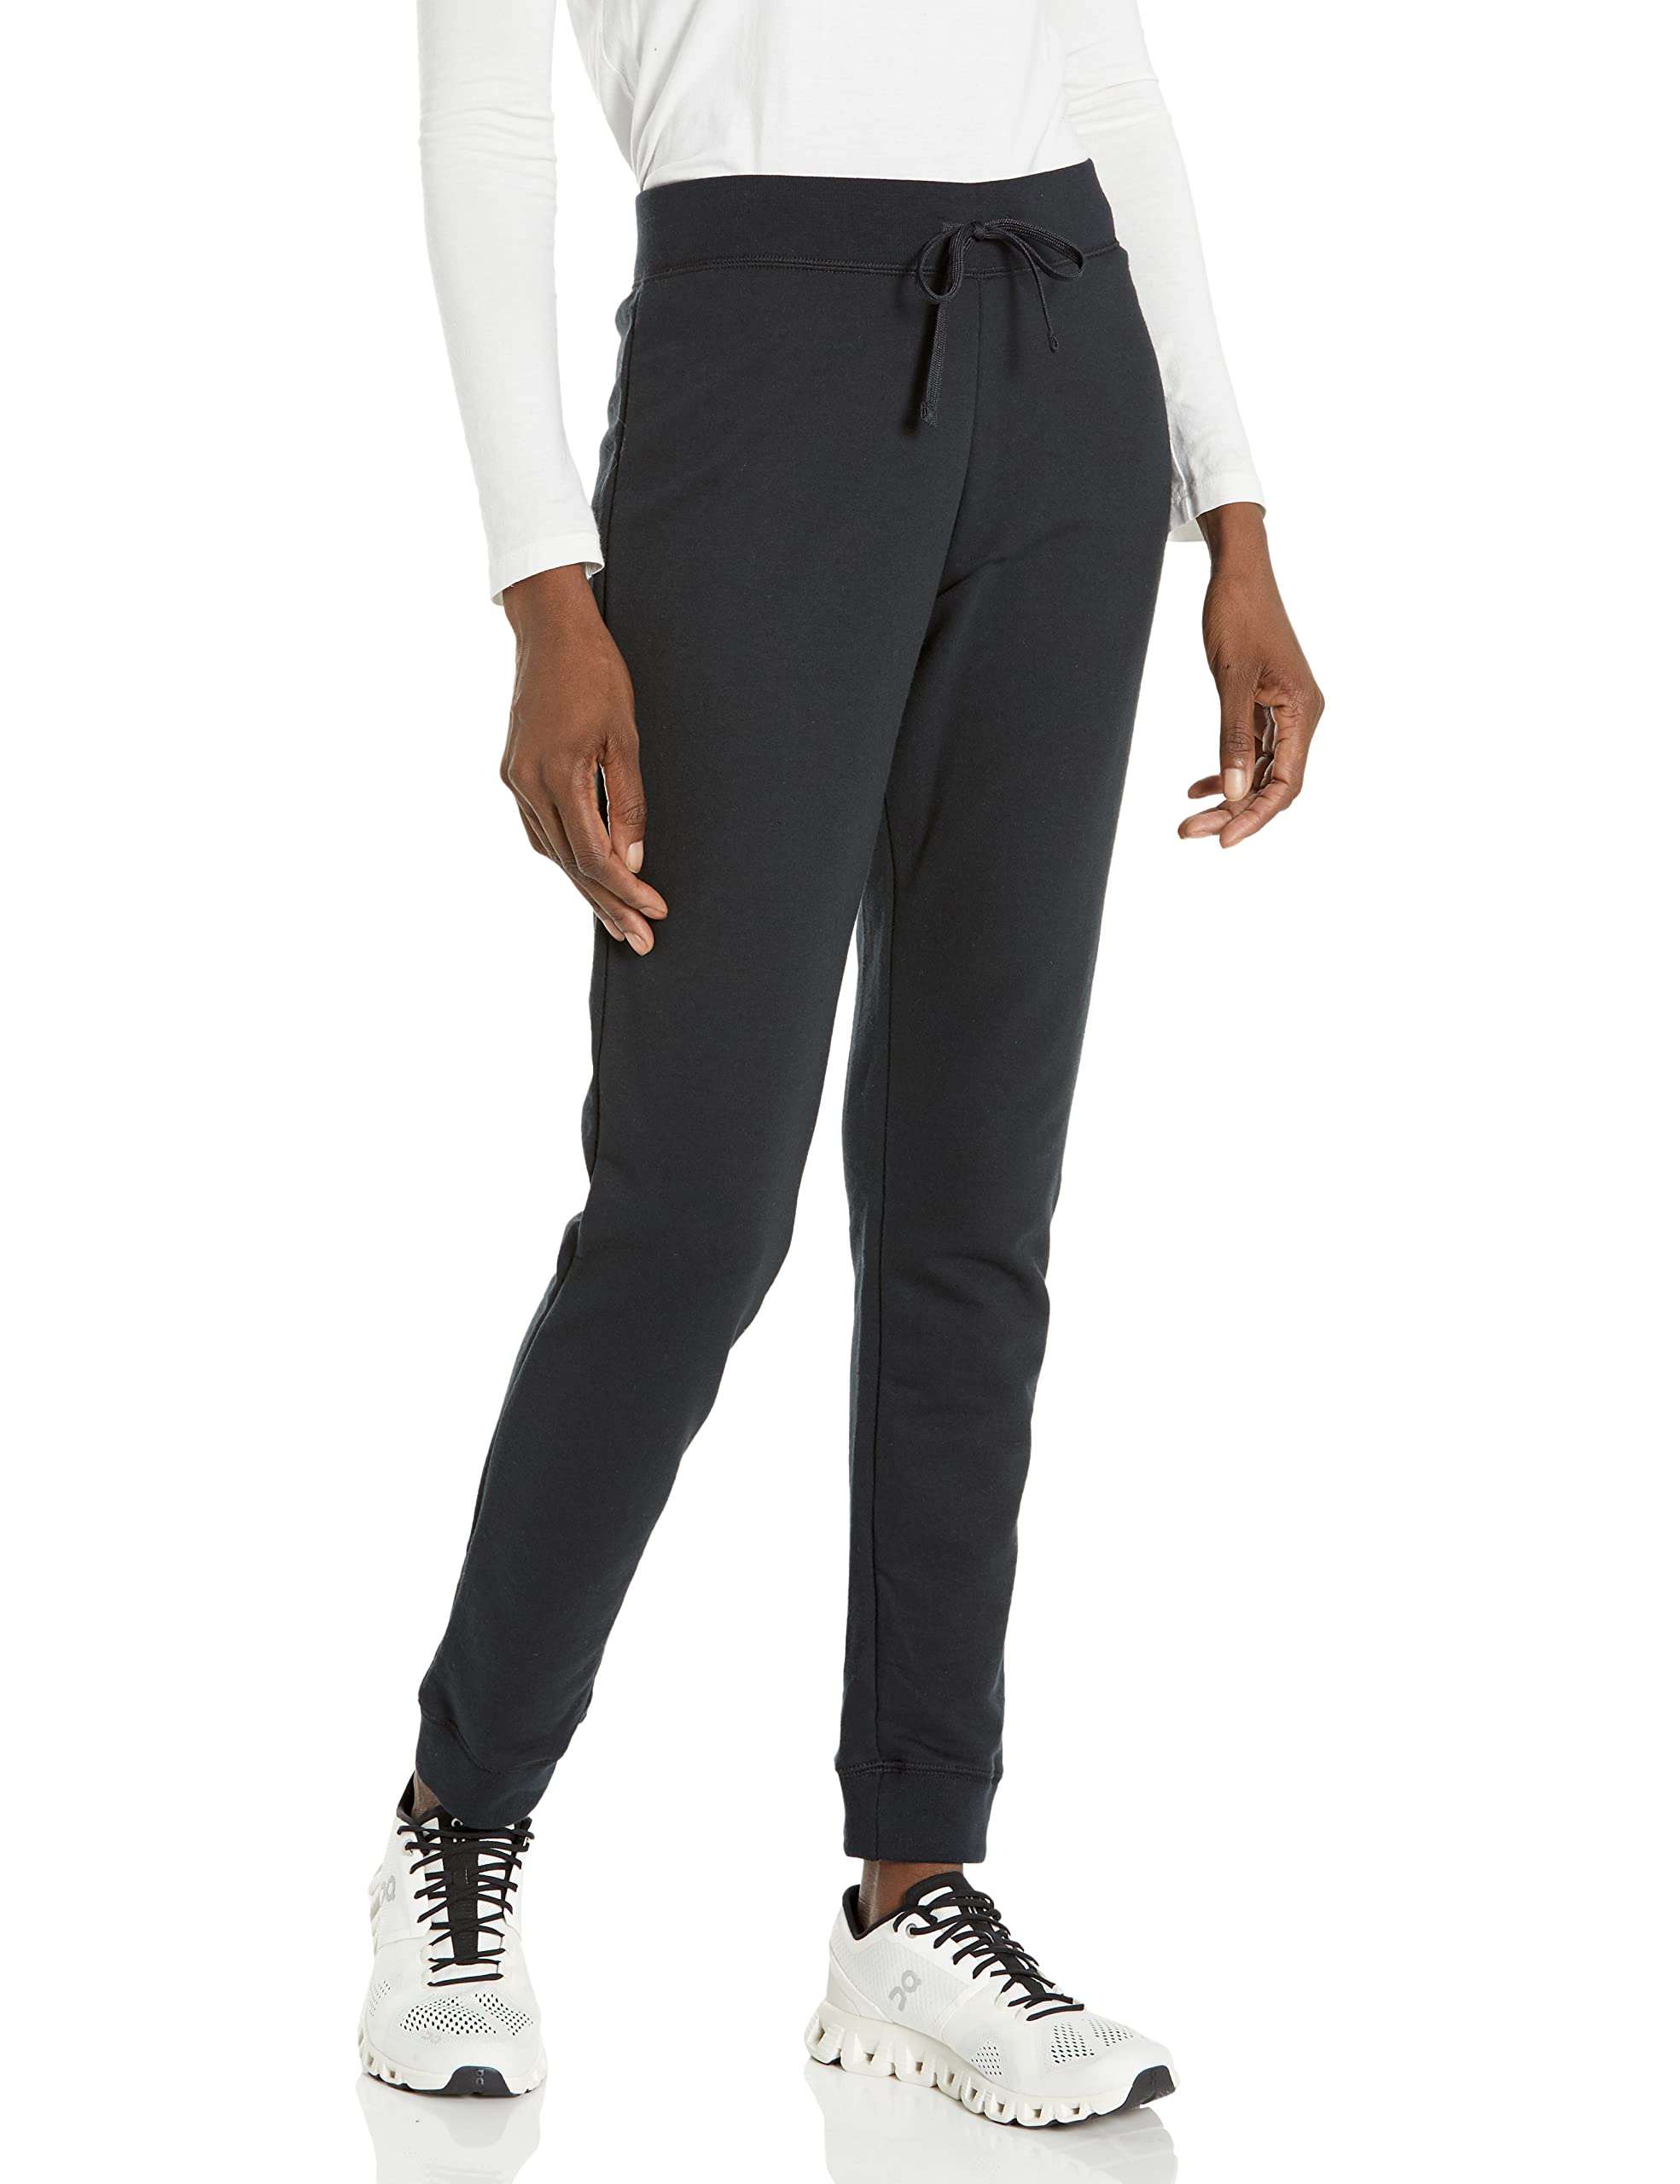 Fruit of the Loom Women's Crafted Comfort Crafted Comfort Jogger Pants (Black, Medium) $6.50 + Free Shipping w/ Prime or on $25+